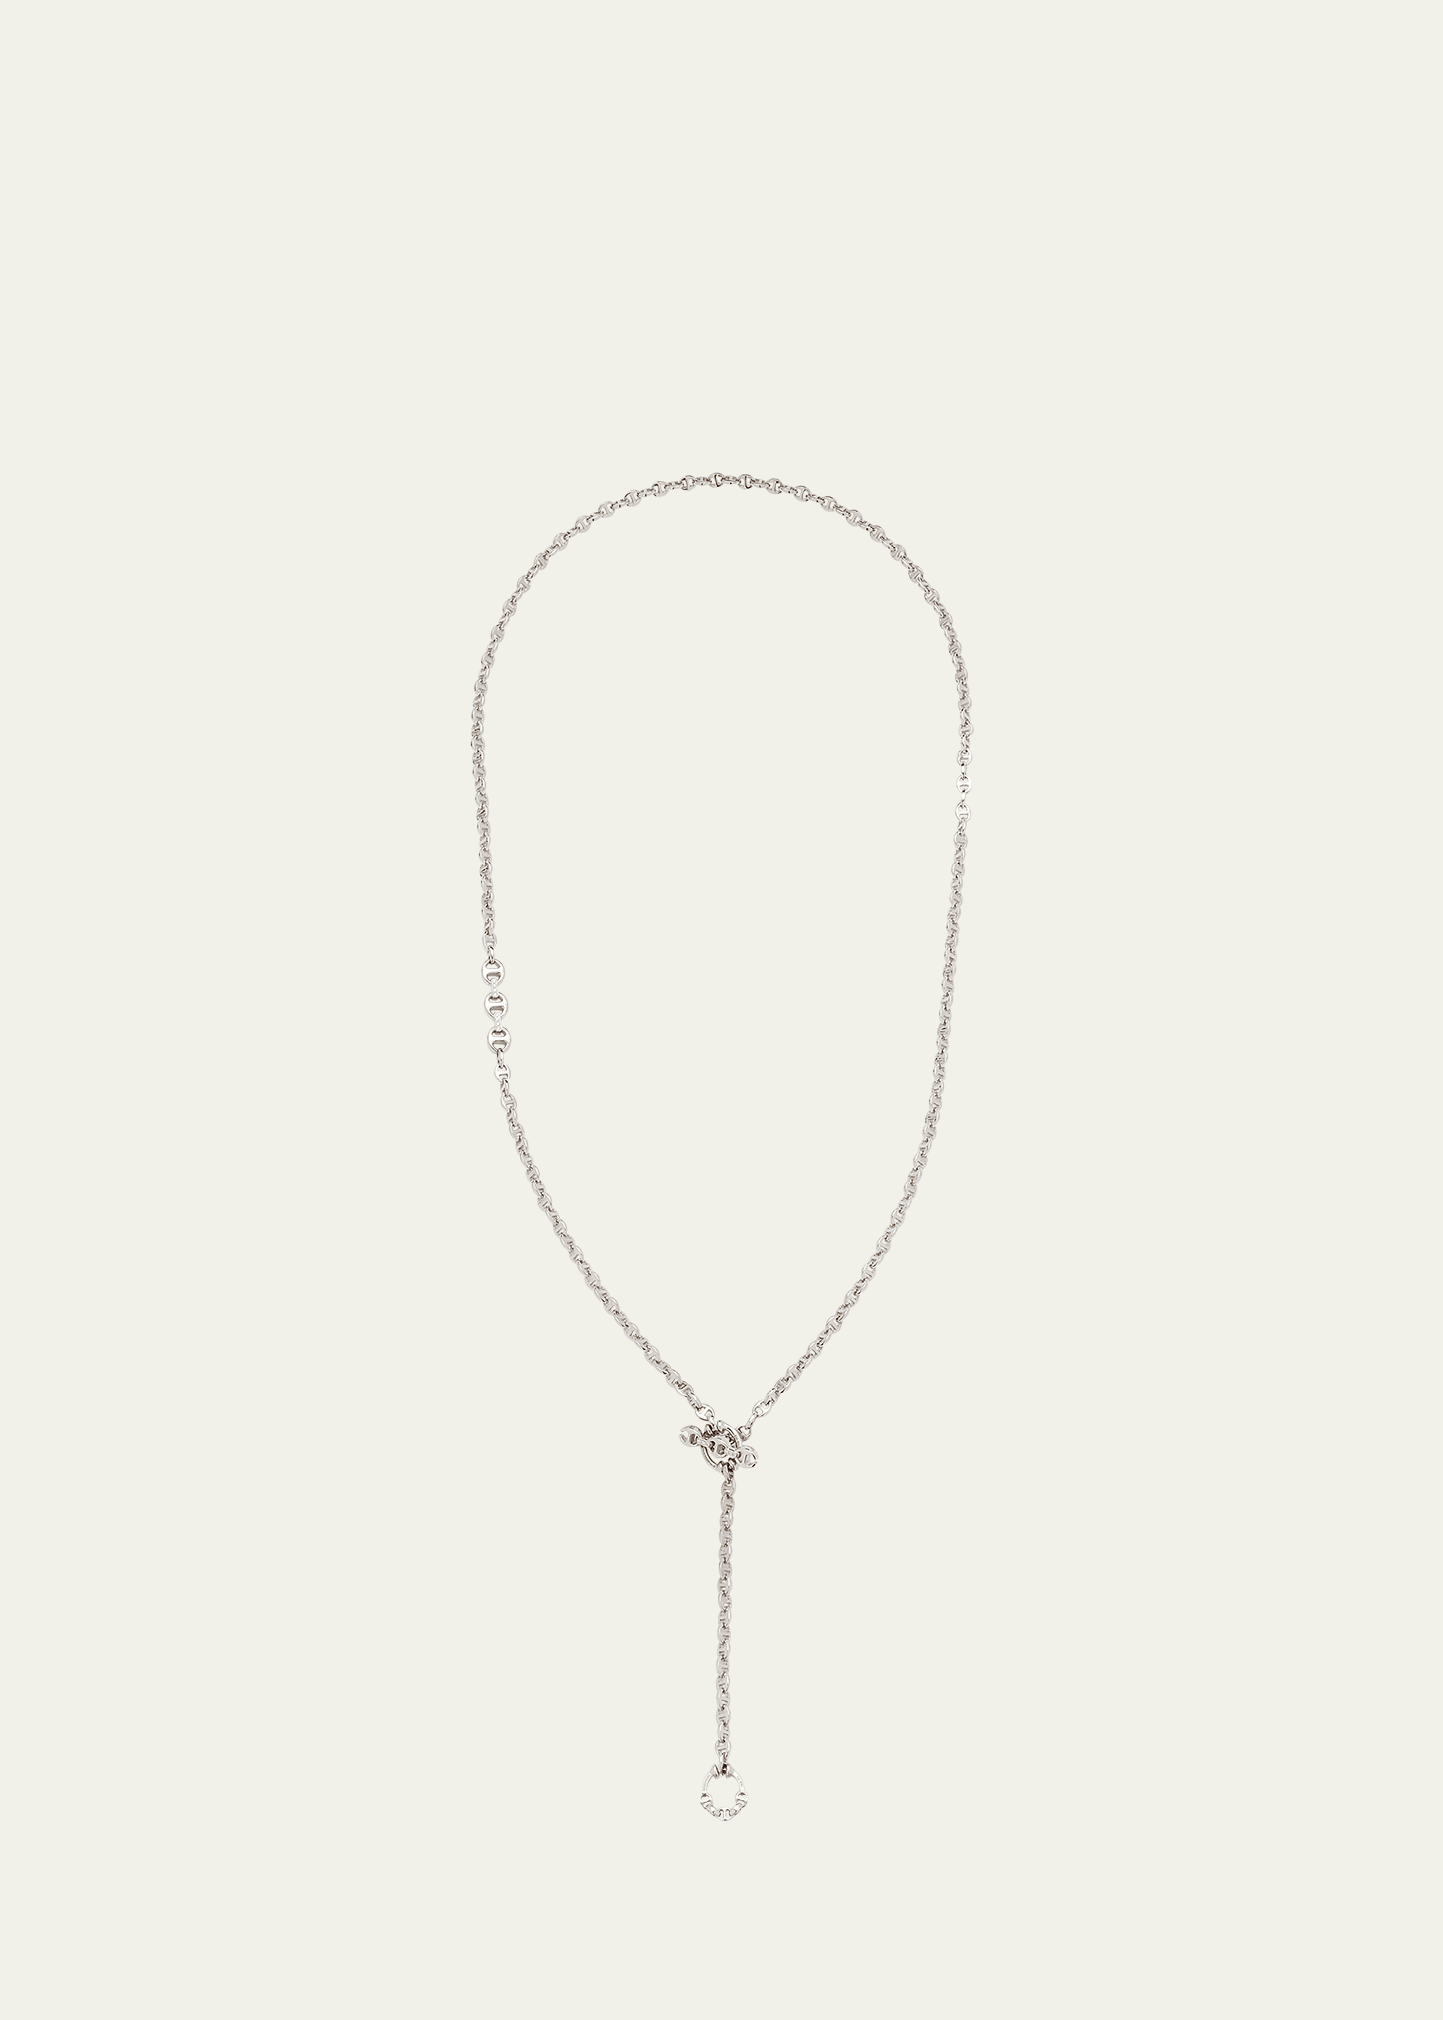 3mm Open-Link Chain with Diamond Bridge and Tri-Link Toggle in 18K White Gold, 30"L